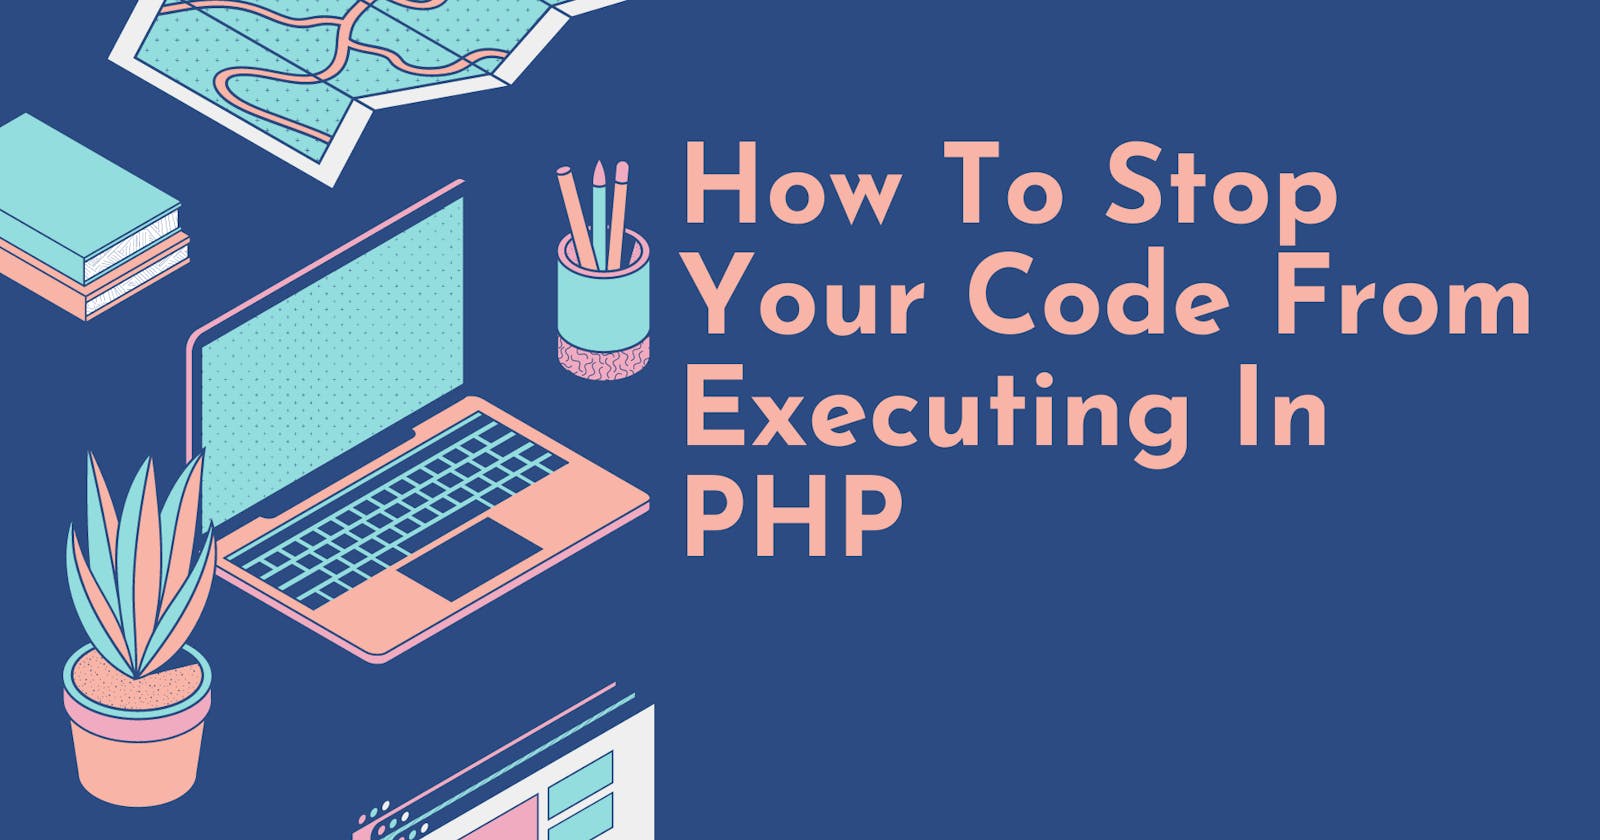 How To Stop Your Code From Executing In PHP